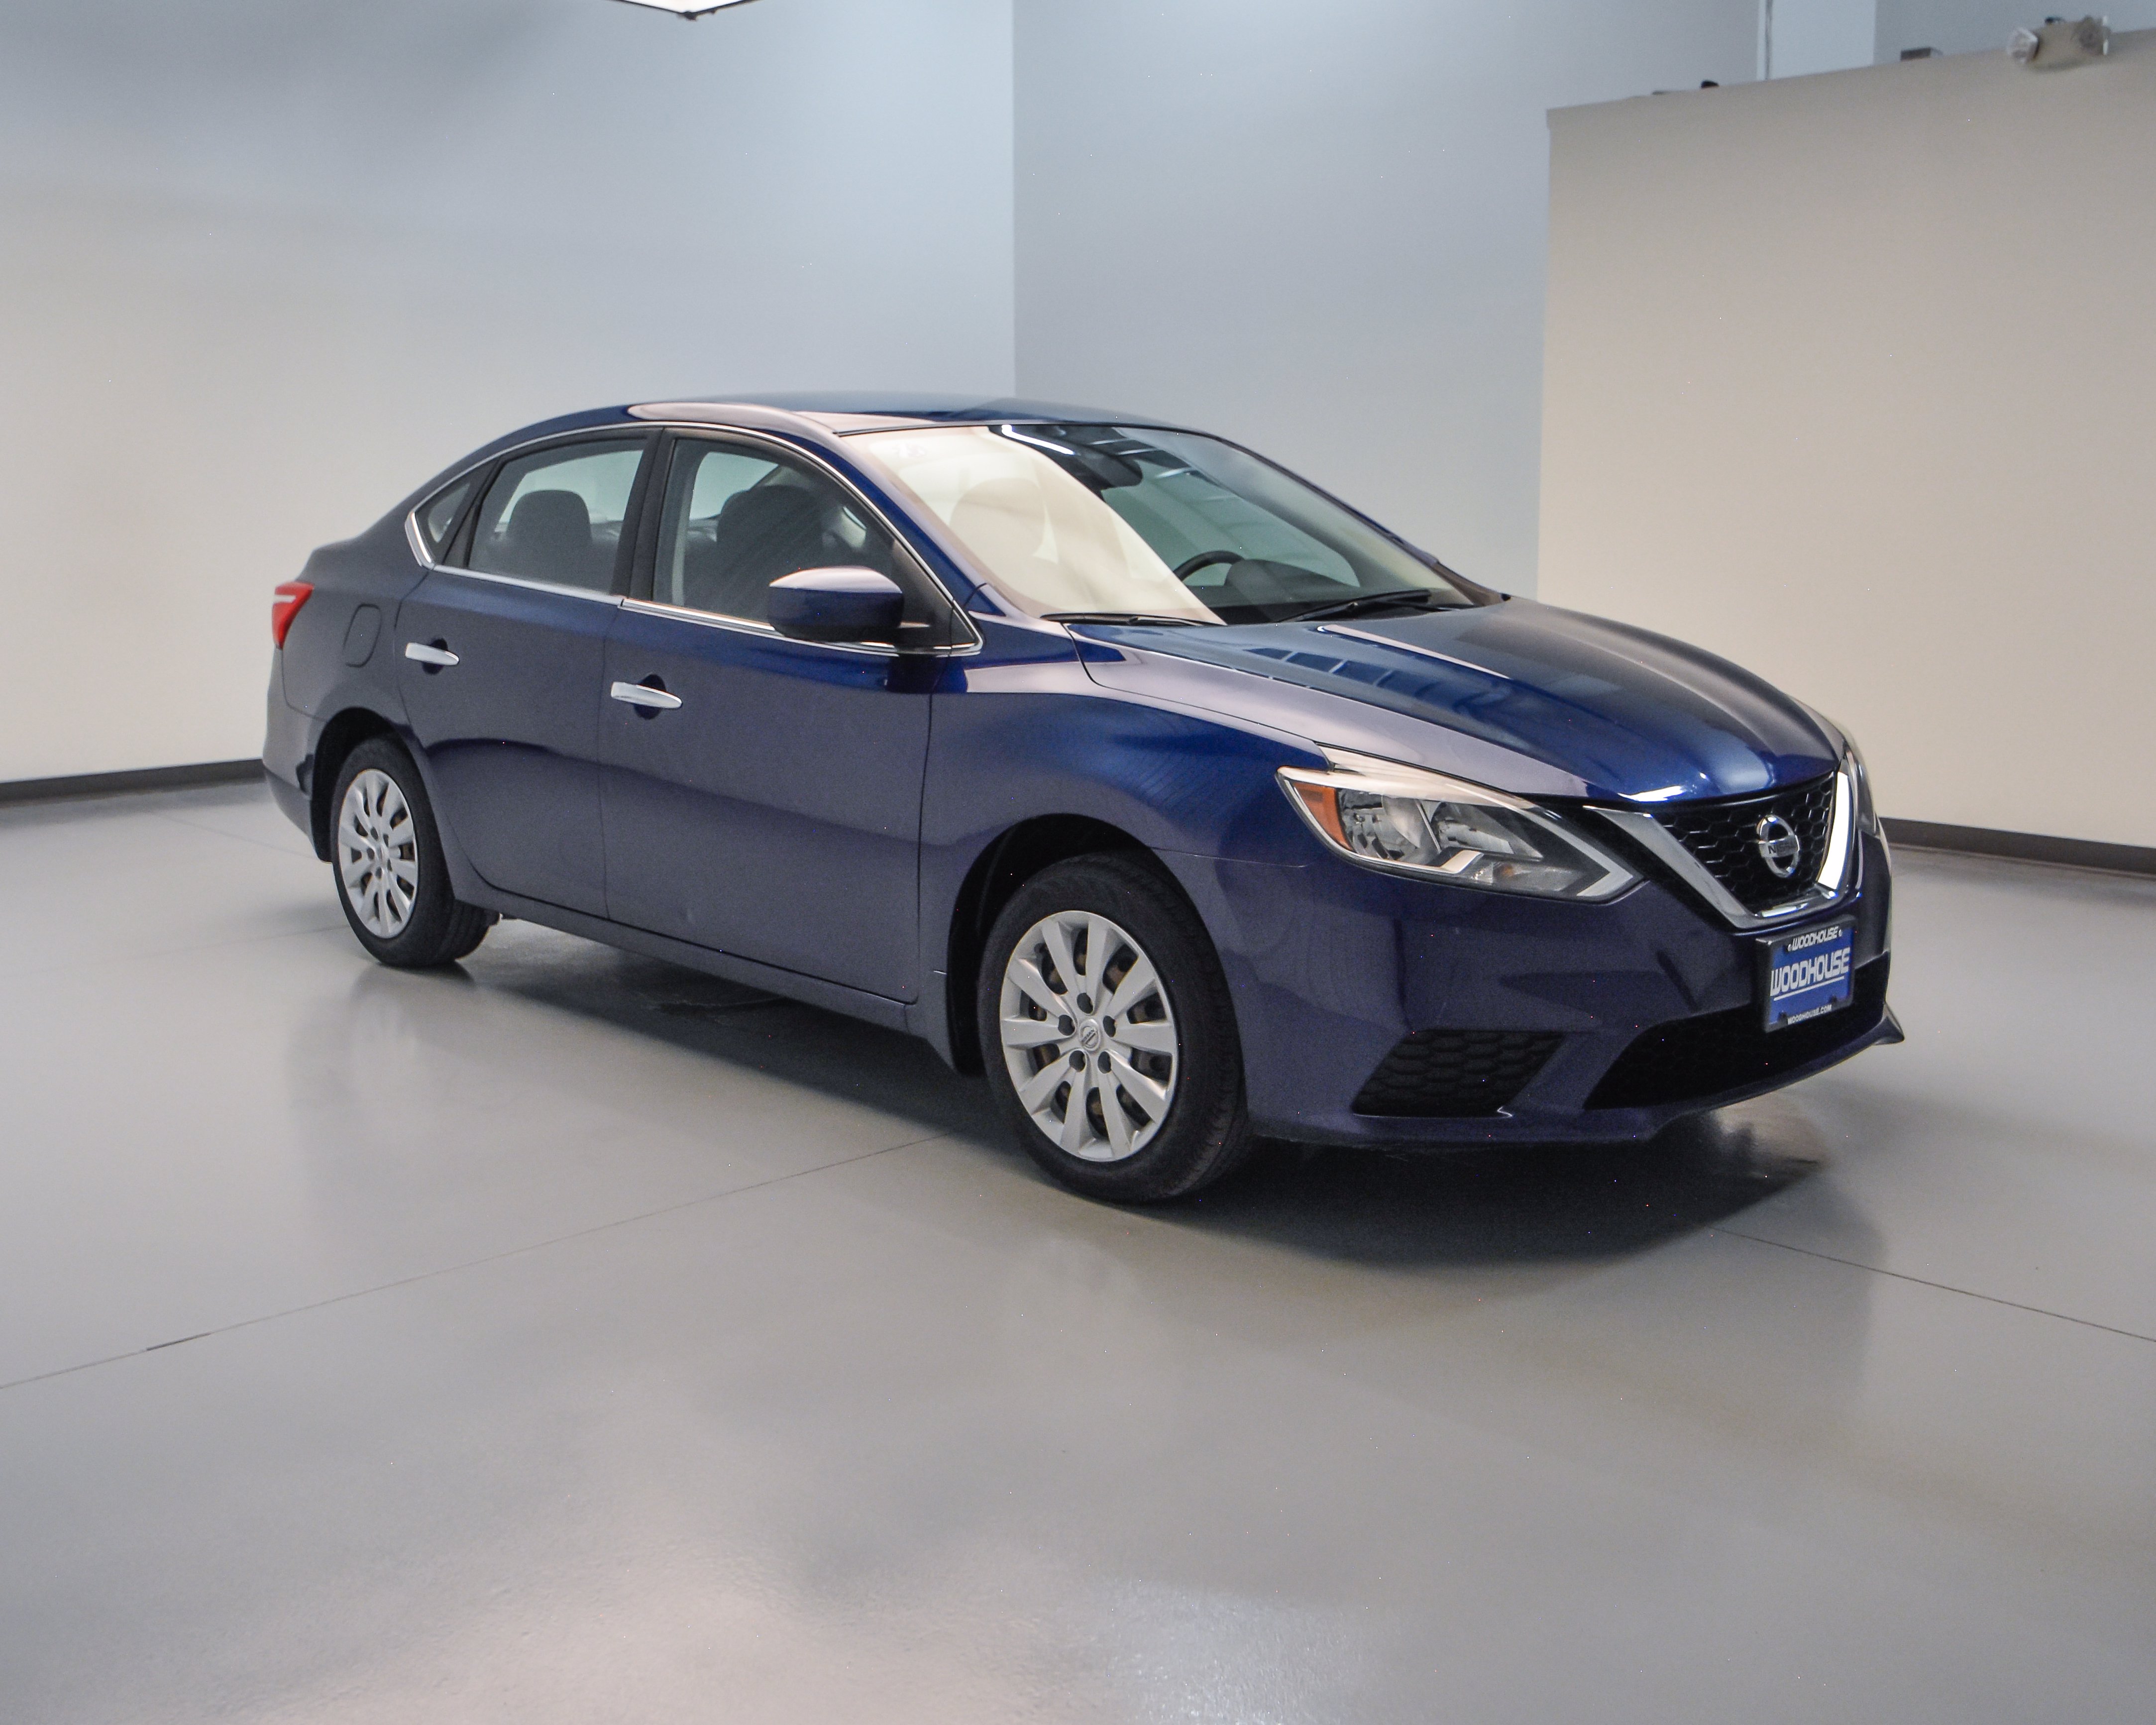 PreOwned 2016 Nissan Sentra S FWD 4dr Car